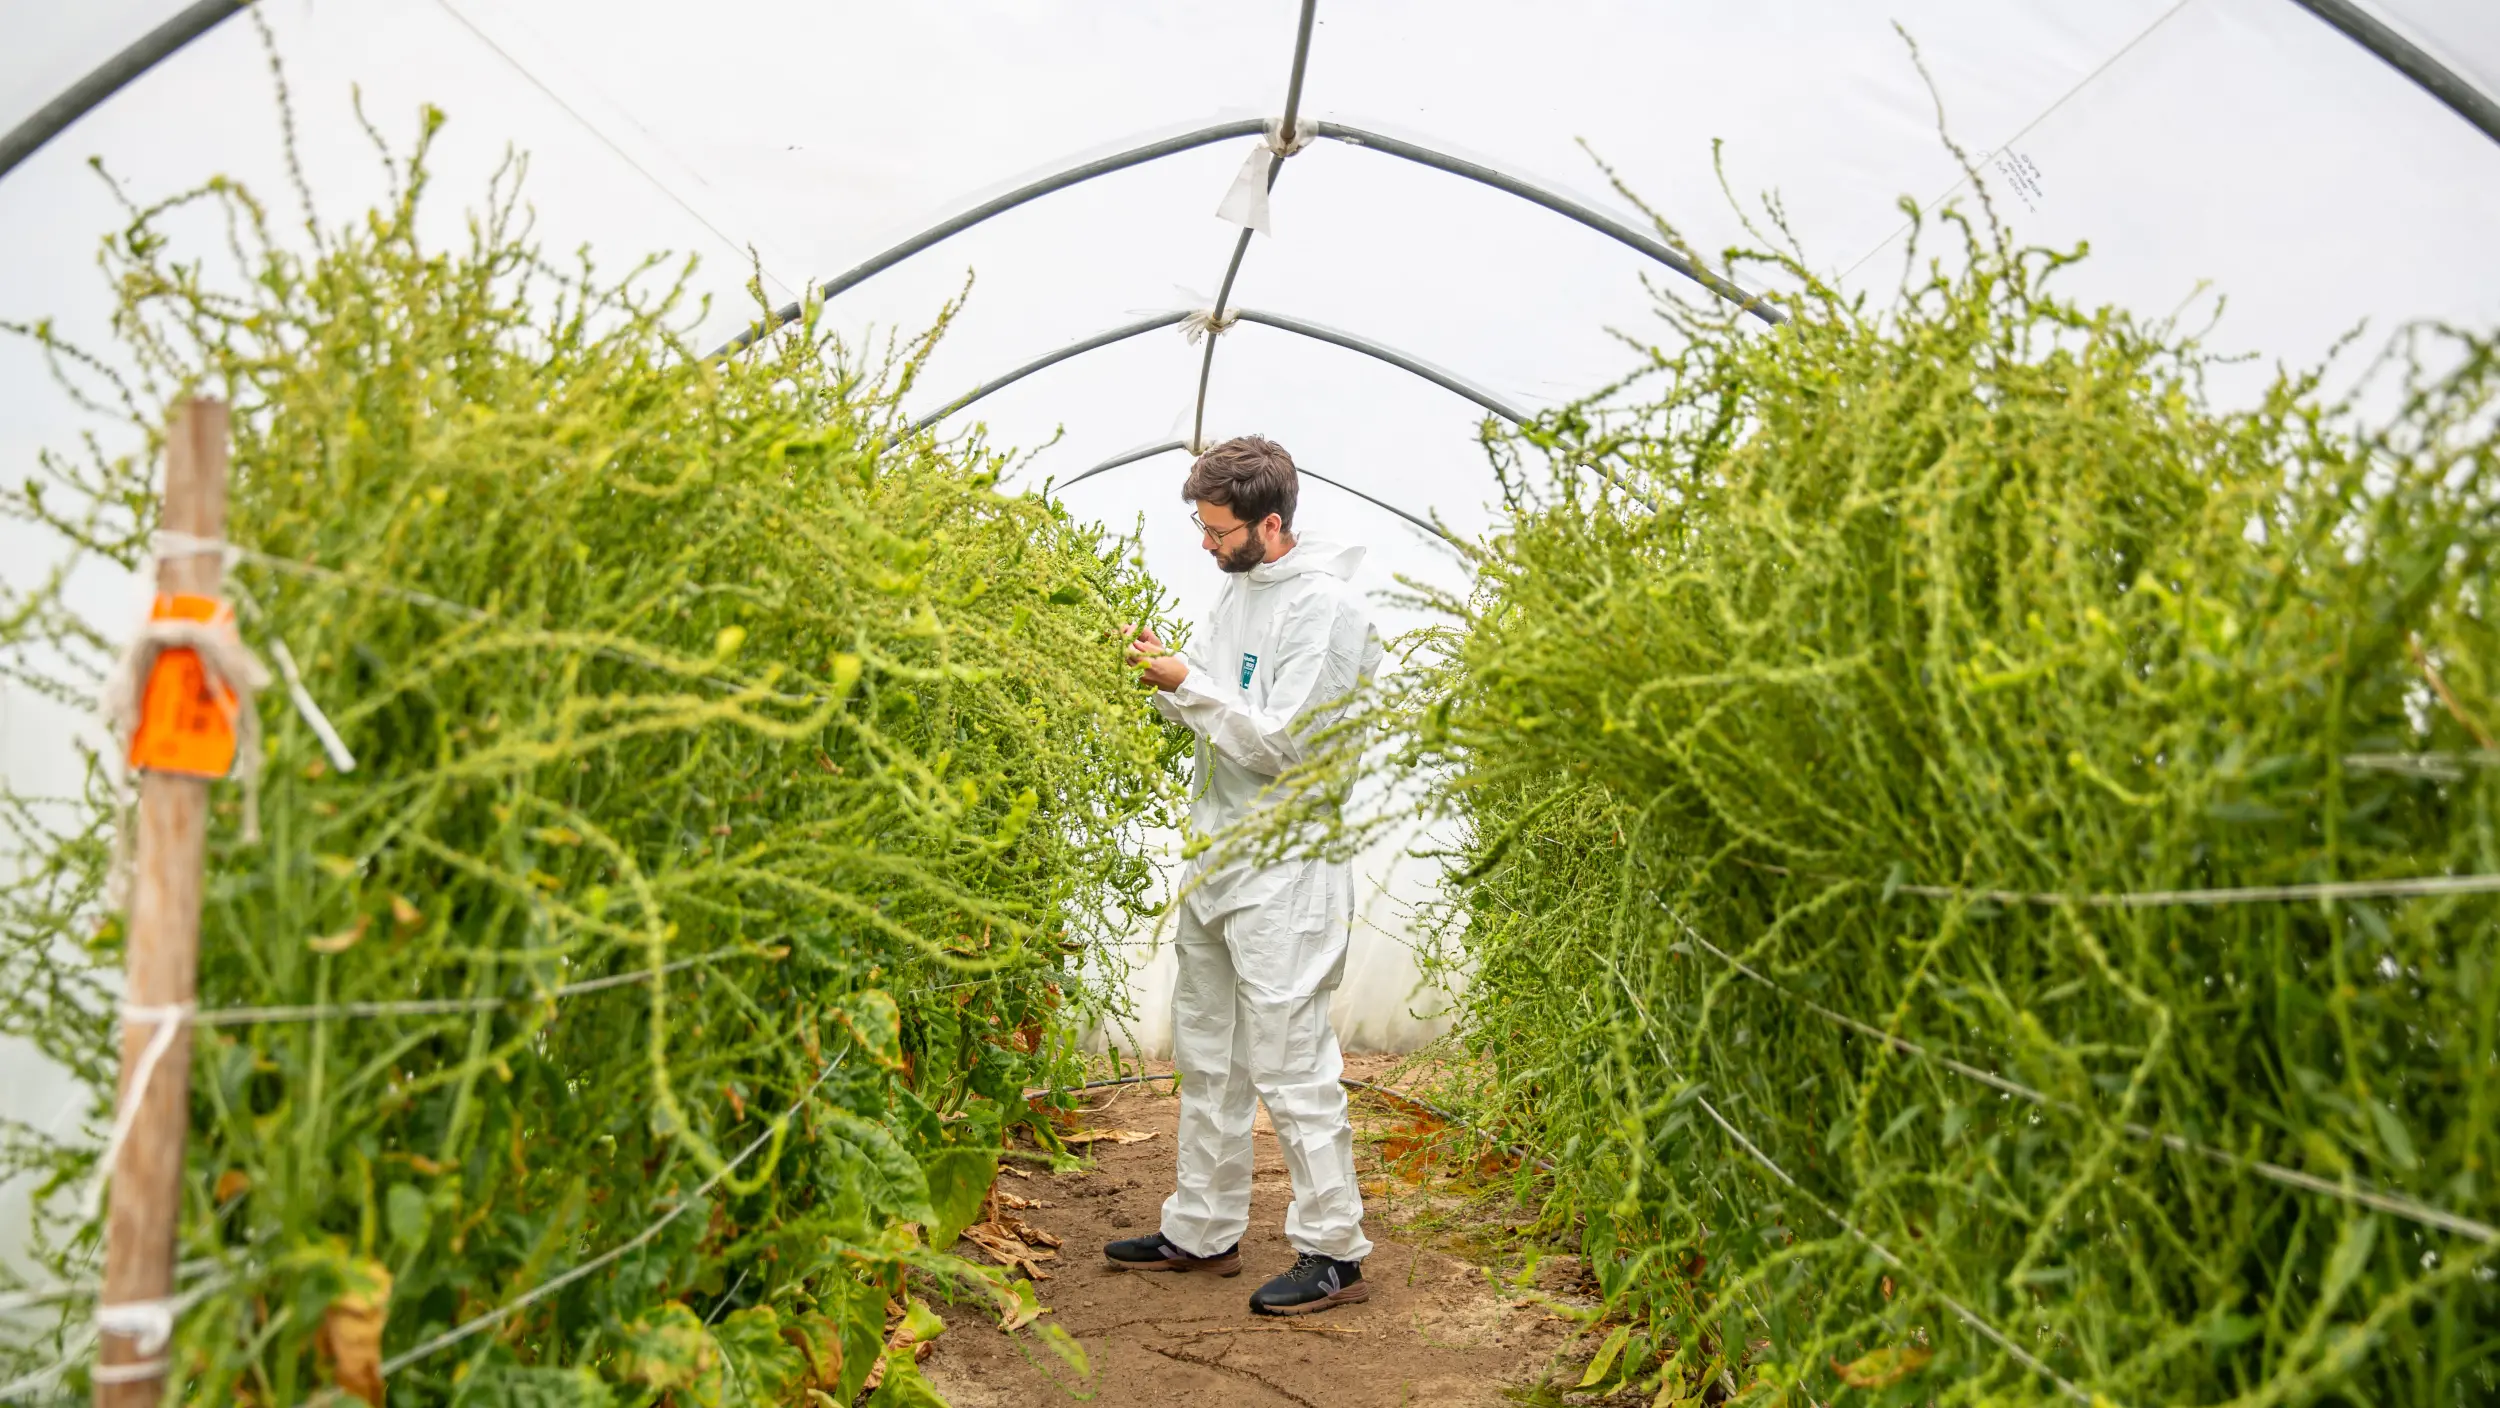 A researcher in a white protective suit in front of tall plants in the greenhouse